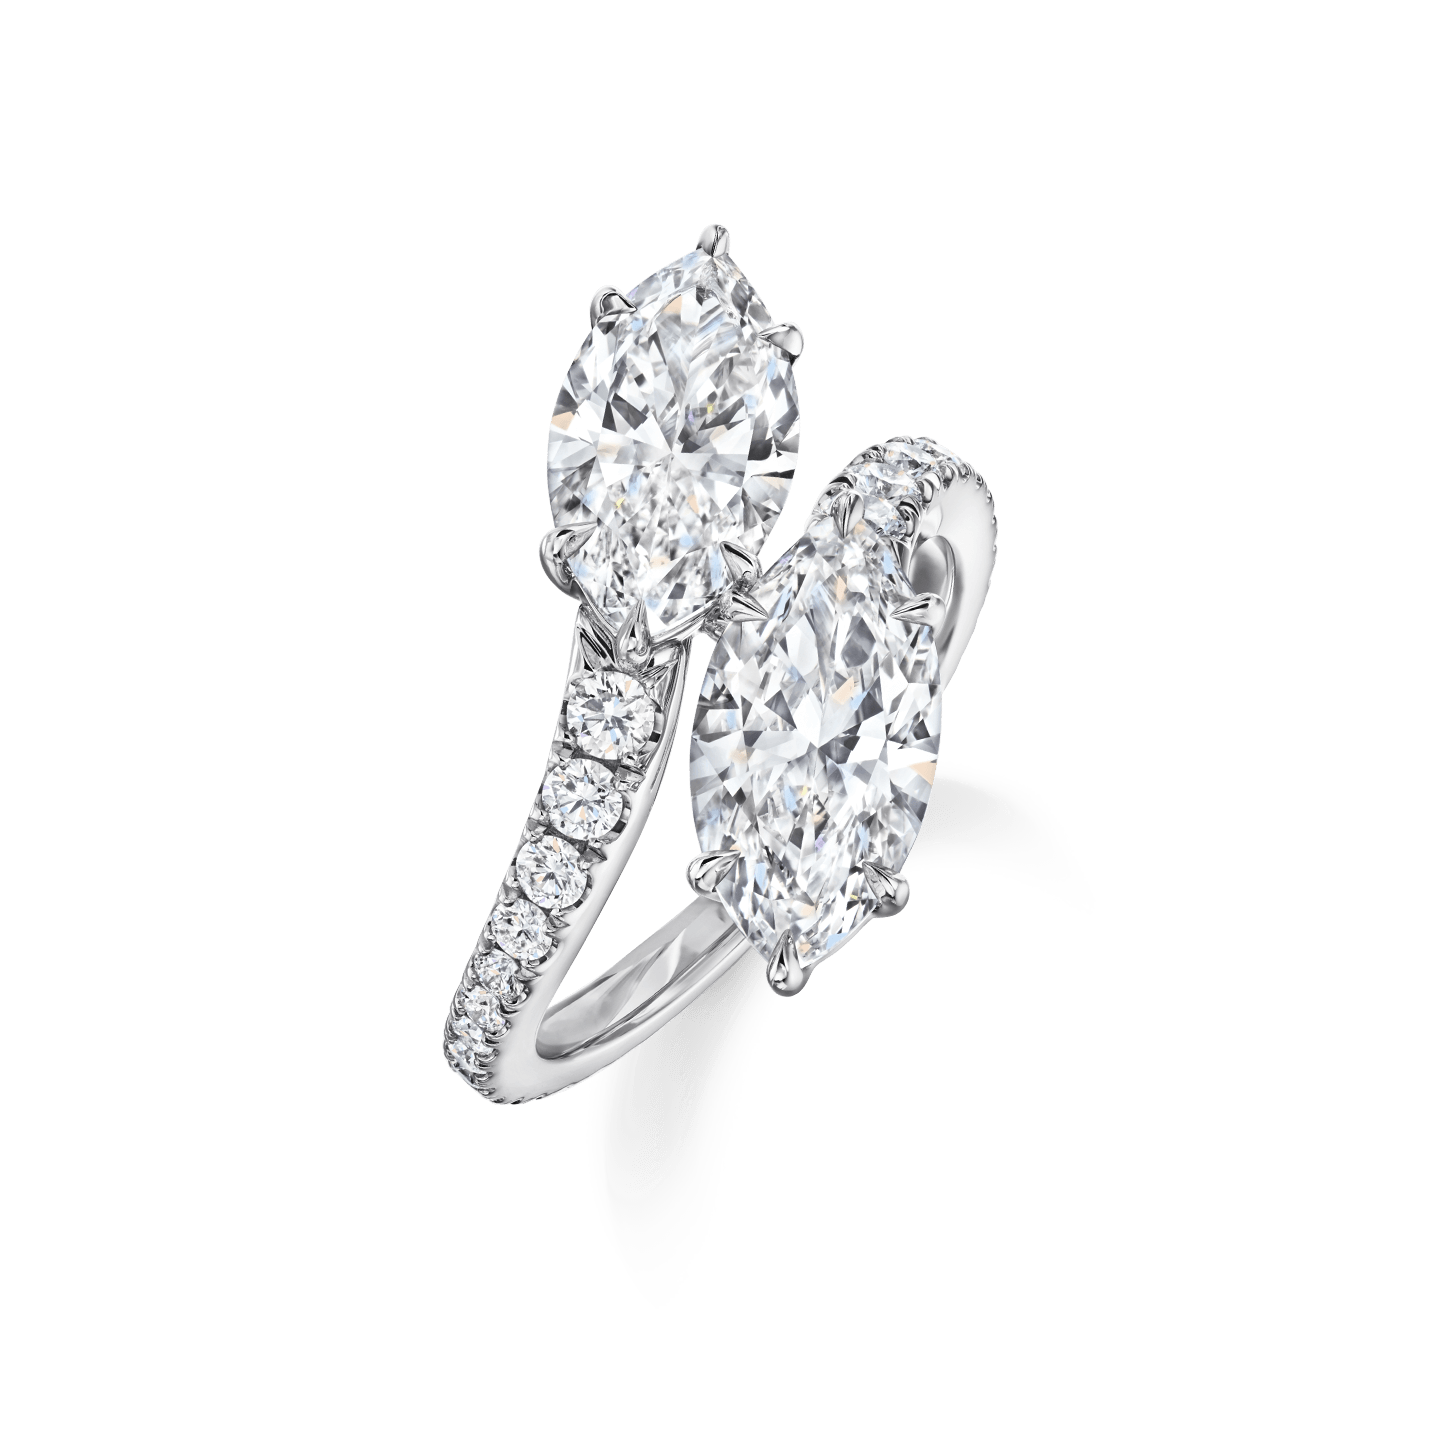 NO RESERVE | HARRY WINSTON DIAMOND RING in United States